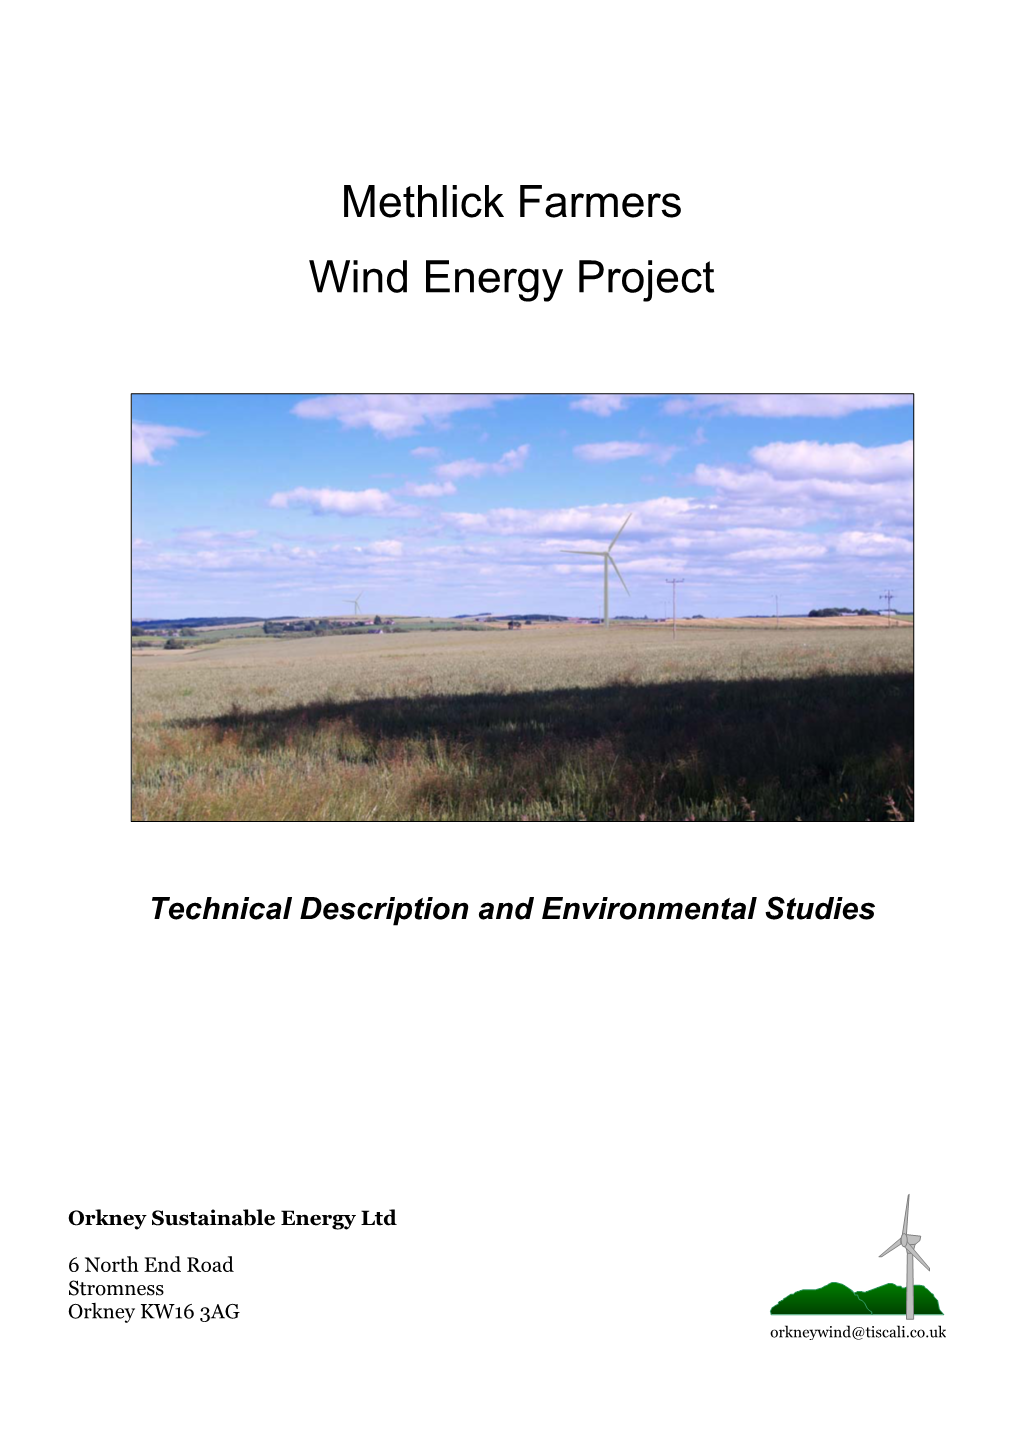 Methlick Farmers Wind Energy Project